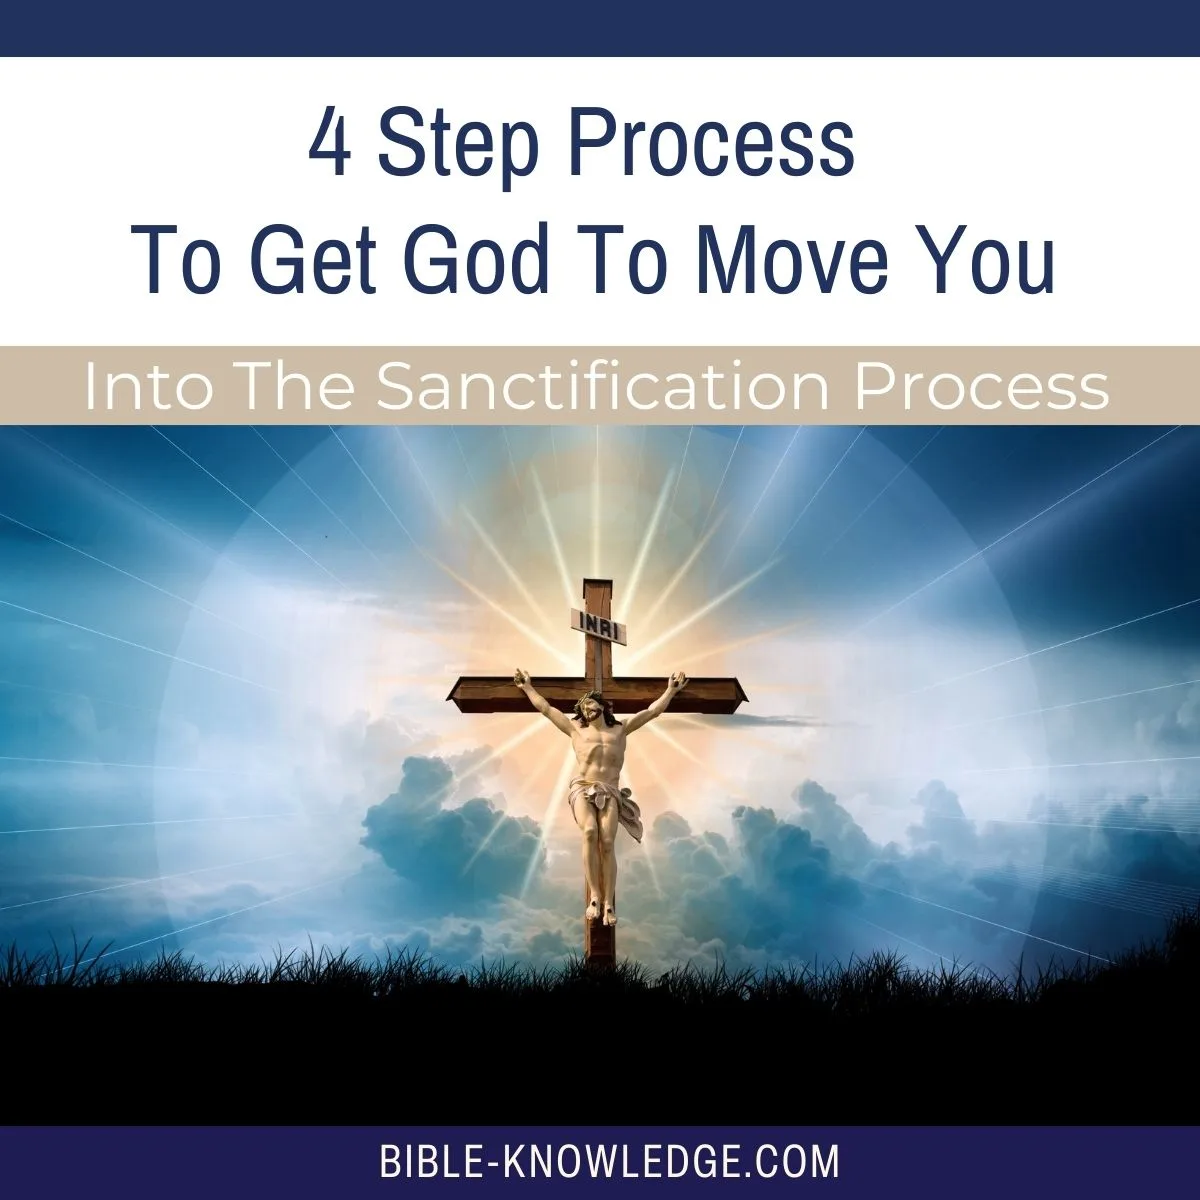 4 Step Process To Get God To Move You Into The Sanctification Process